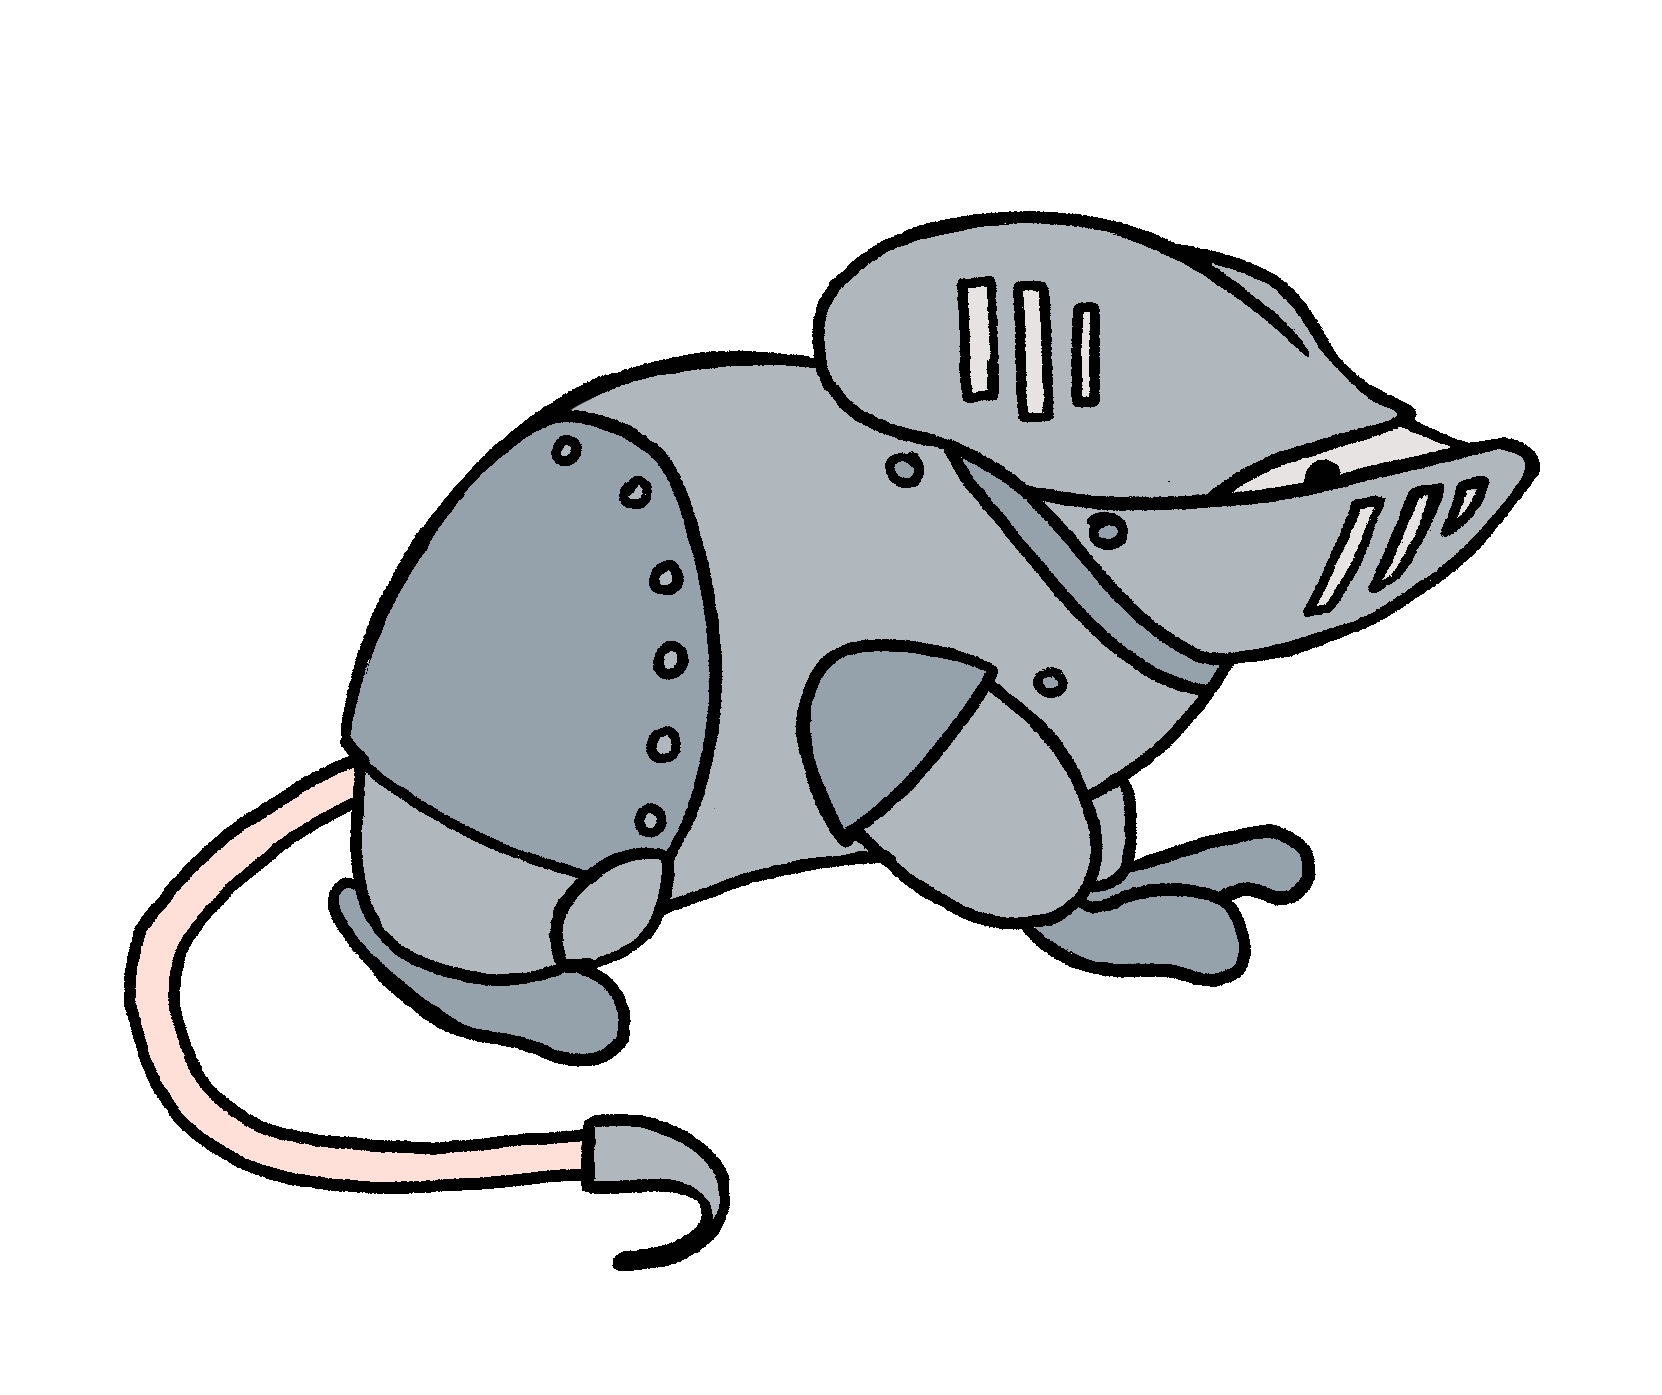 Medieval Mouse